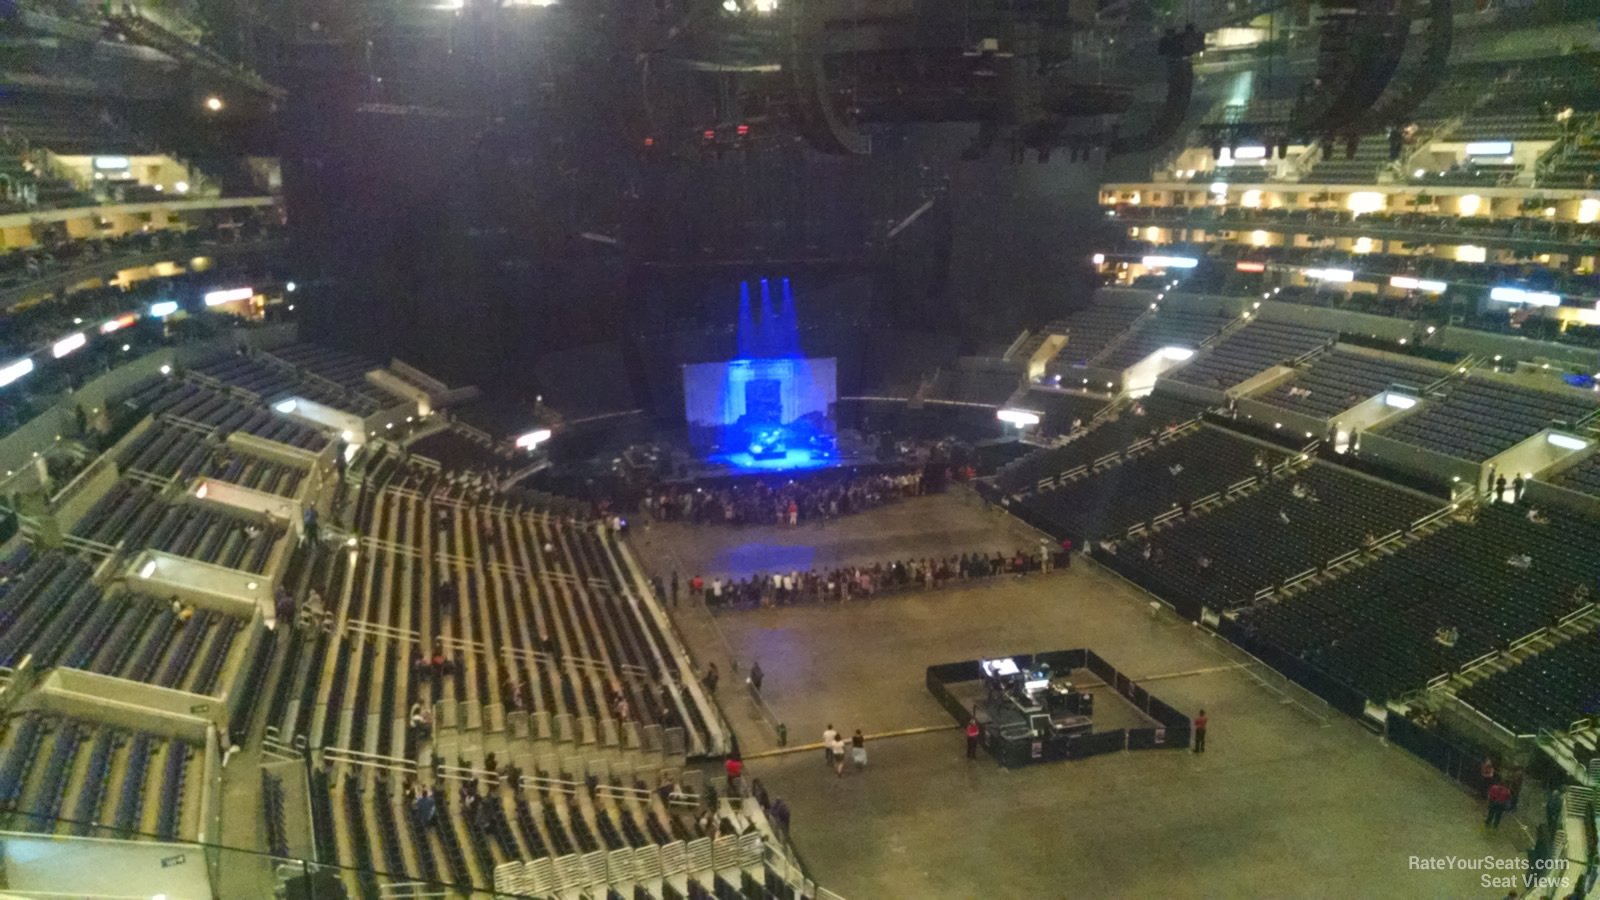 section 312, row 3 seat view  for concert - crypto.com arena